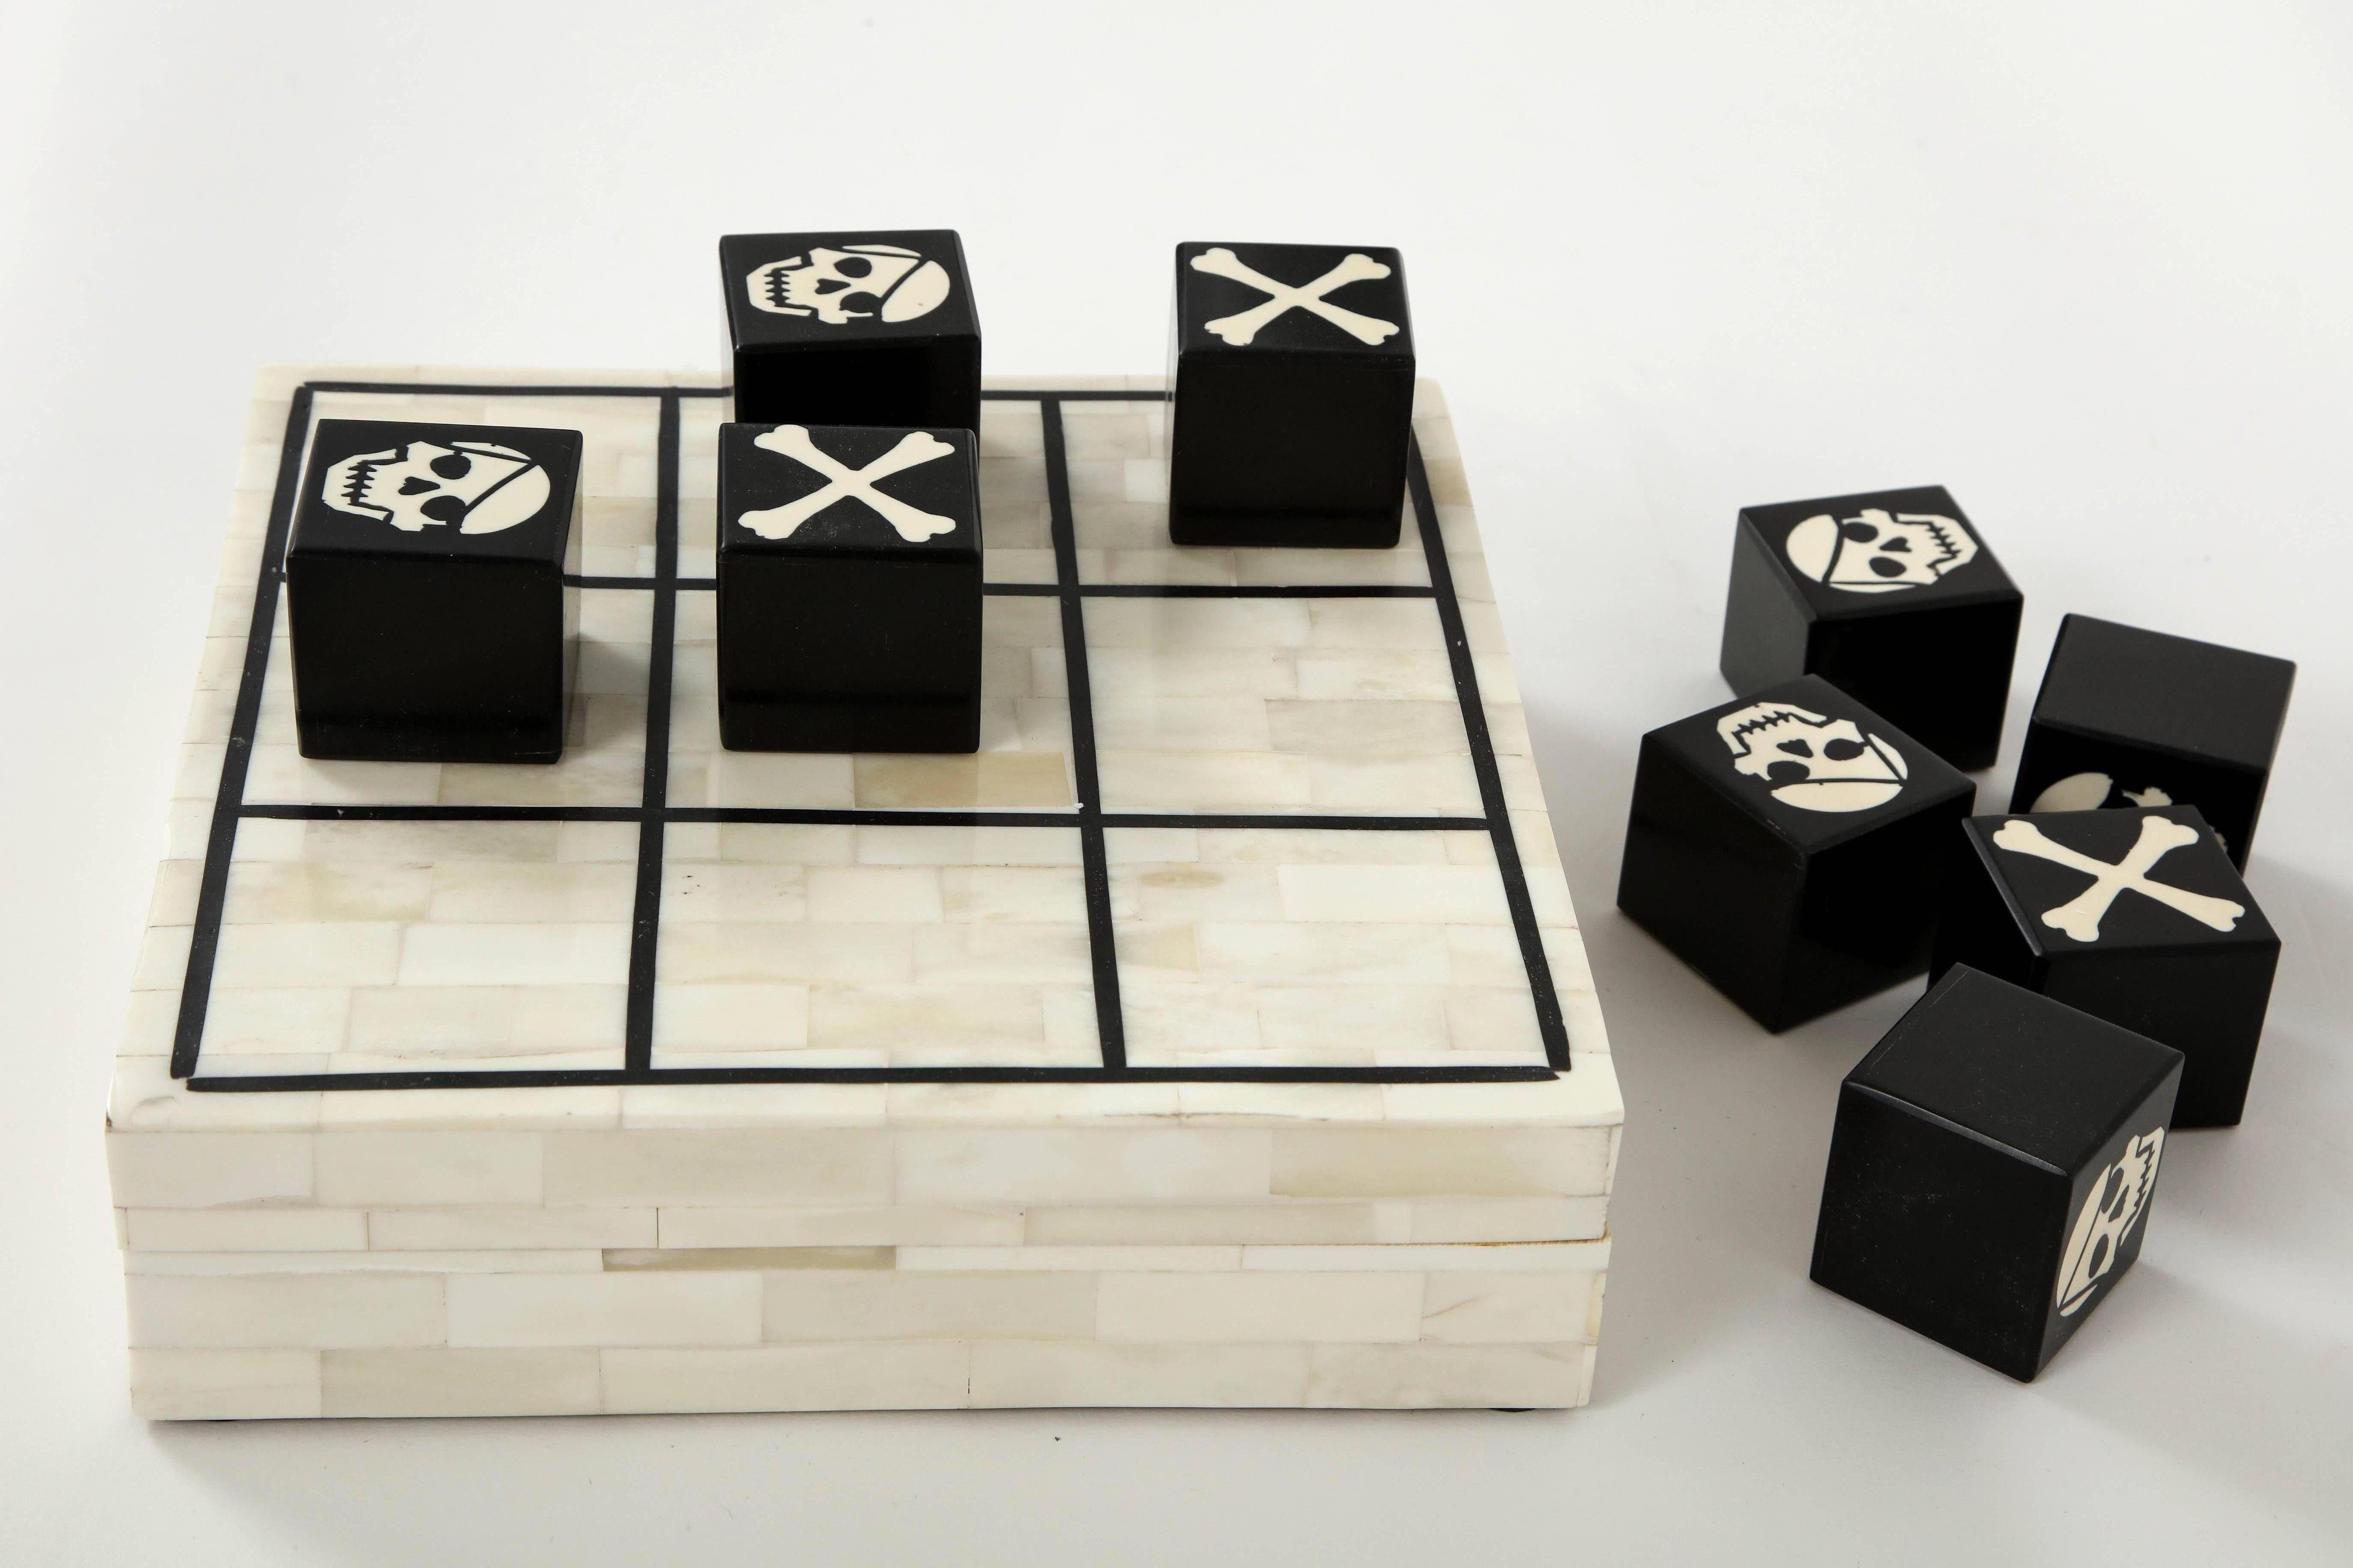 Stylish Tic Tac Toe game made from natural and dyed bone inlay. Game pieces feature skull and cross bones. Game board opens to store game pieces. A great addition to any coffee table, desk or bookcase.